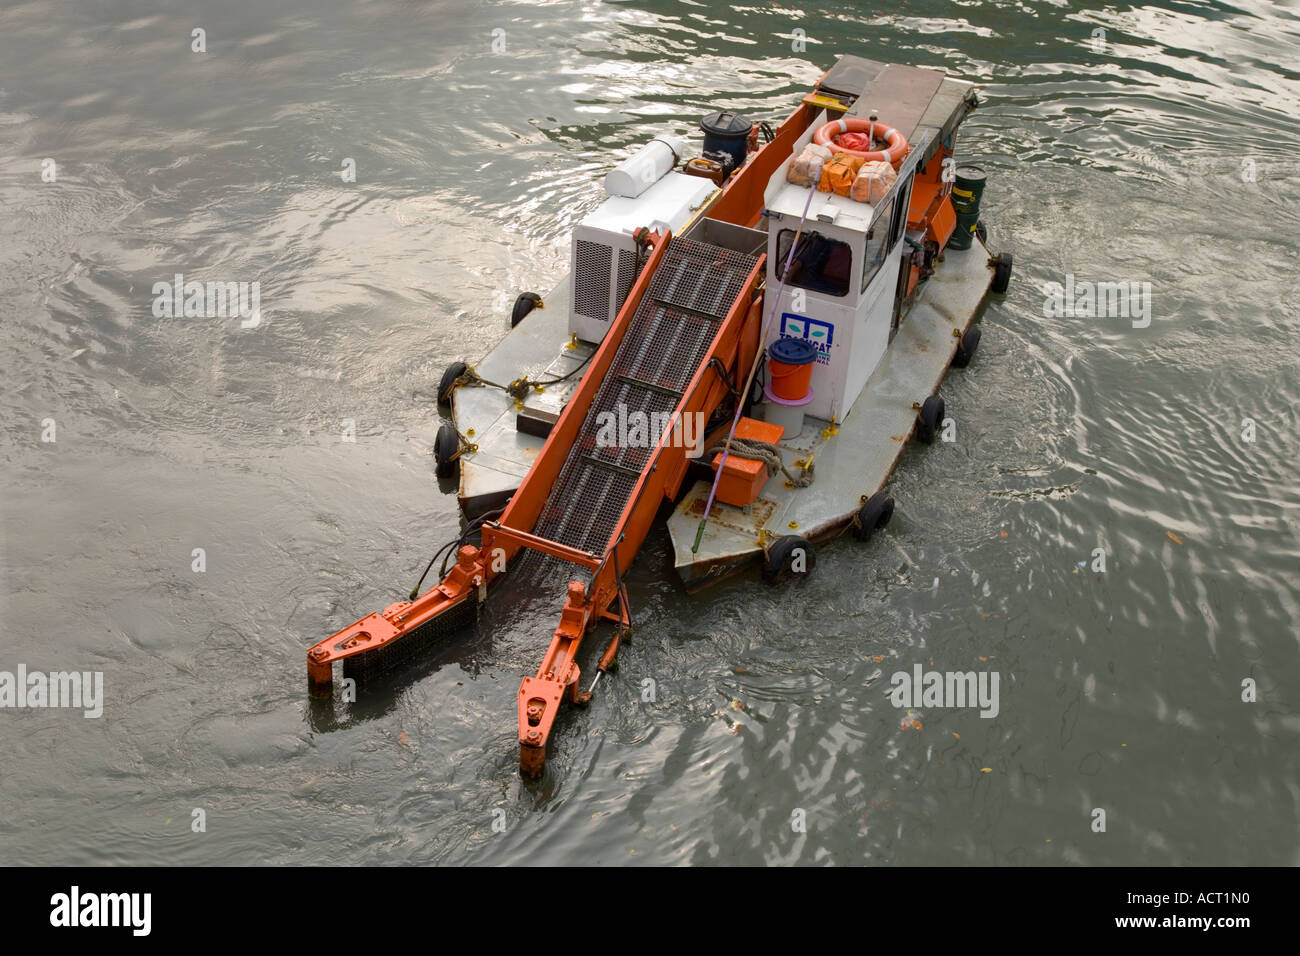 Boat used on Singapore River to clean up litter in the water Stock Photo